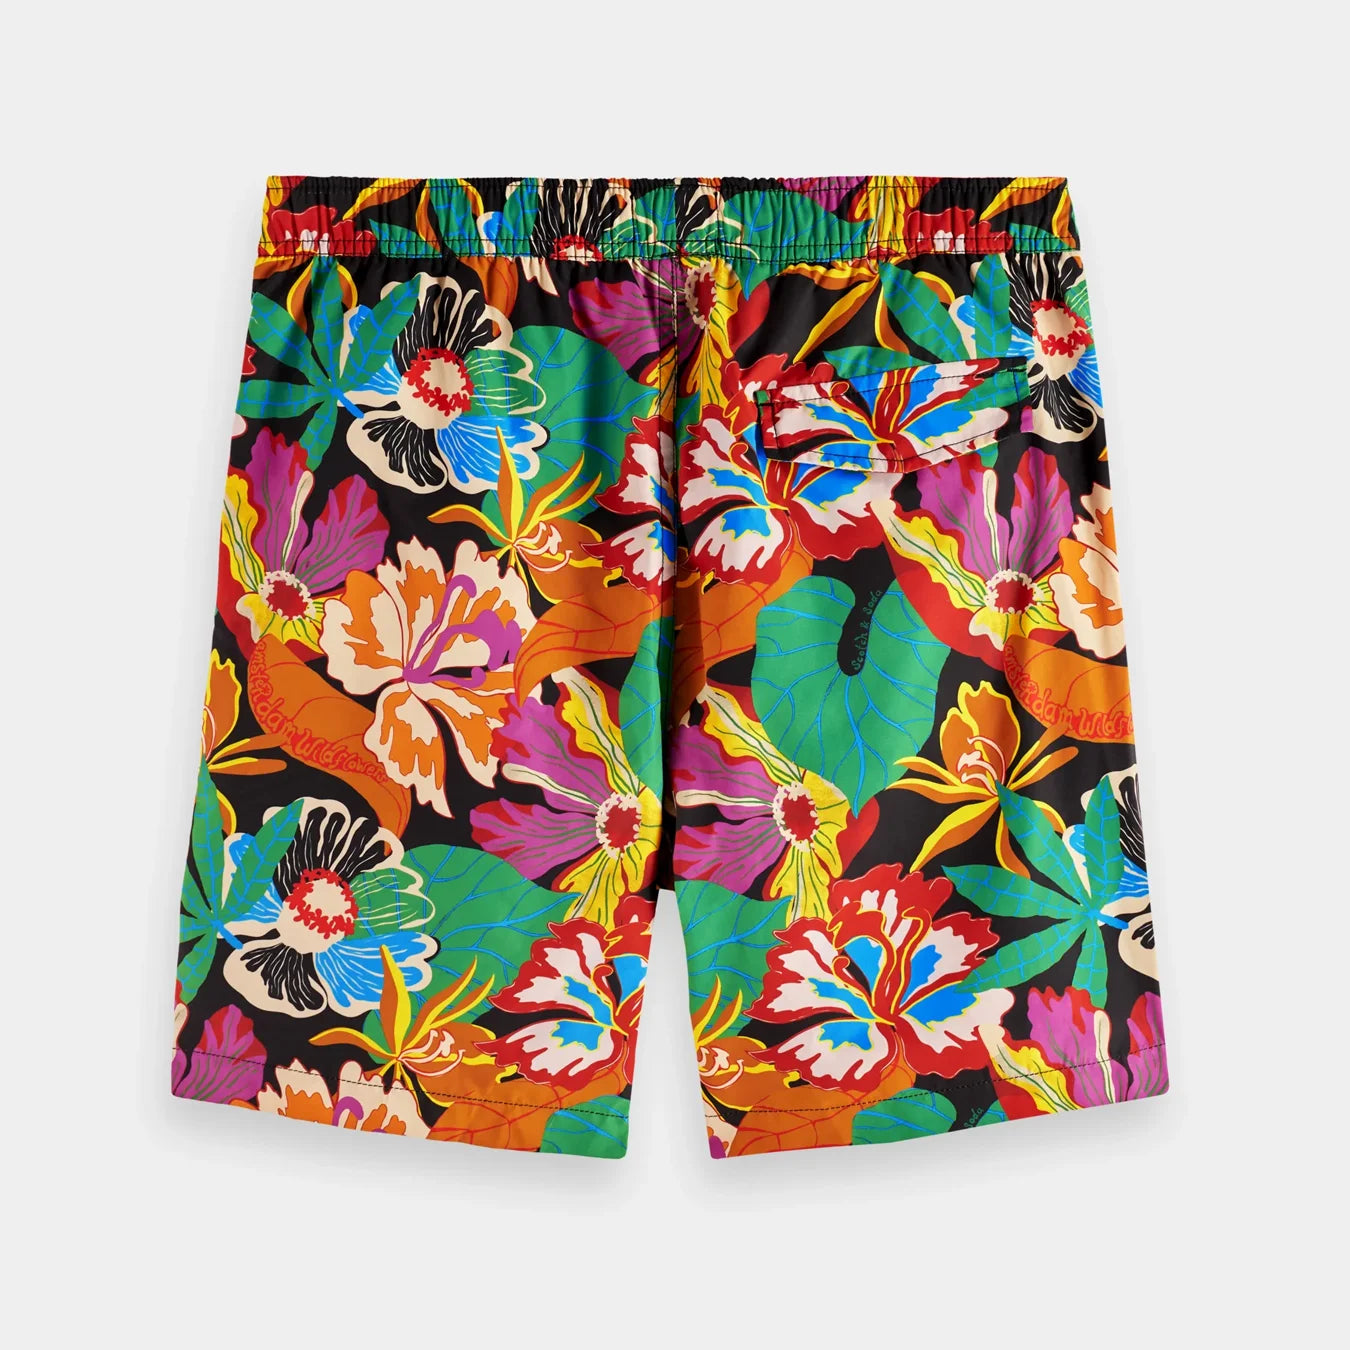 'Scotch & Soda Mid-Length Printed Swim Shorts' in 'Black Floral' colour